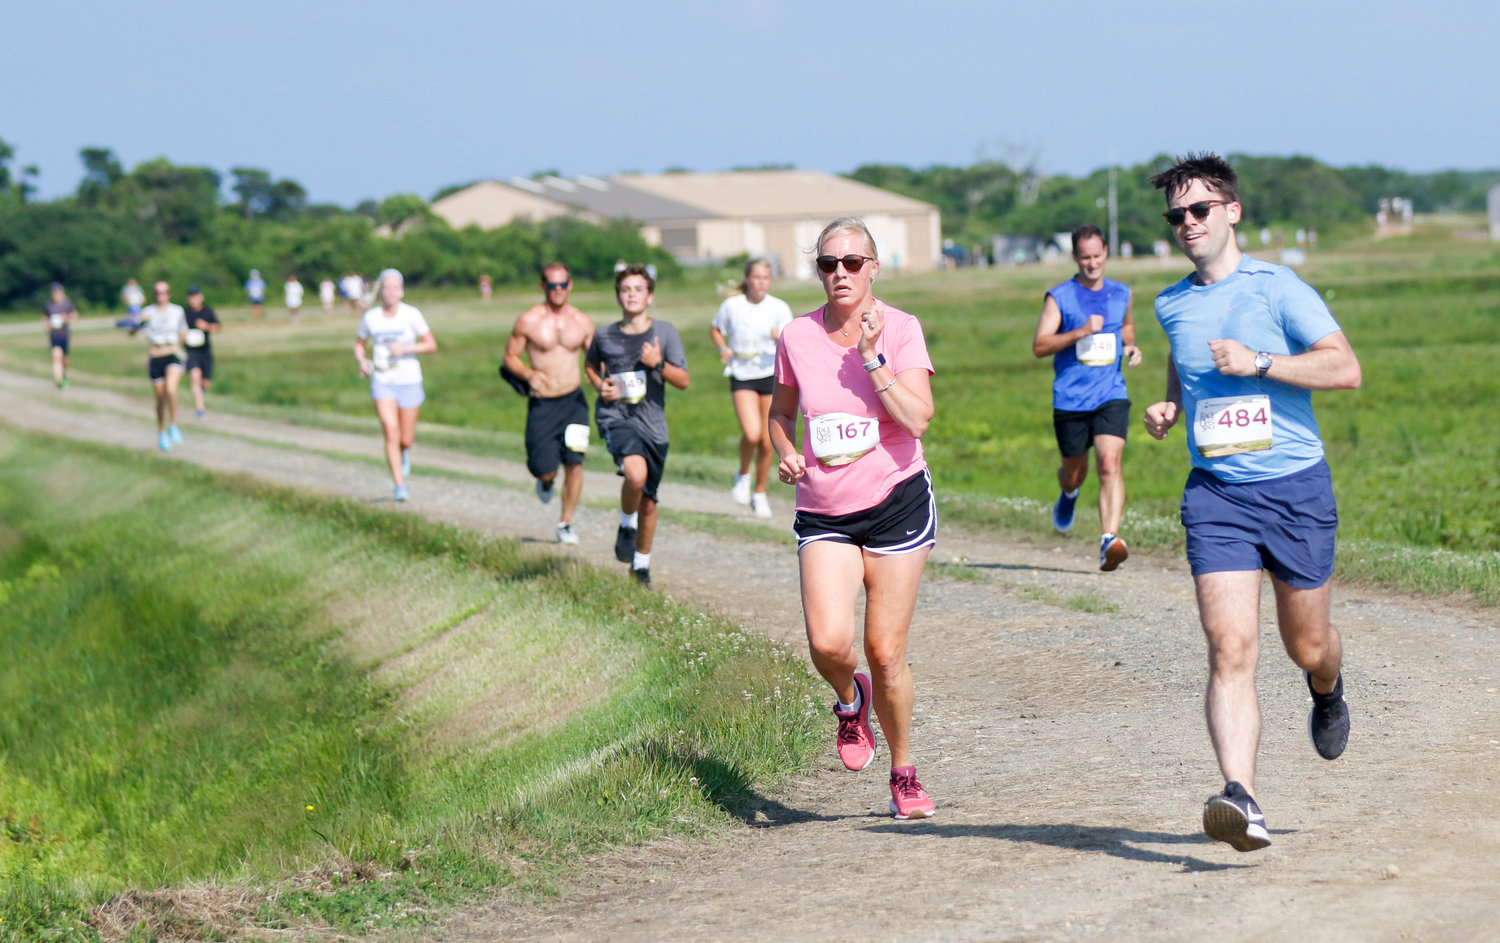 The in-person race will be held at the Milestone Cranberry Bog. The two-mile walk begins at 8 a.m., followed by a 10K at 8:15 a.m. and a 5K at 8:30 a.m.